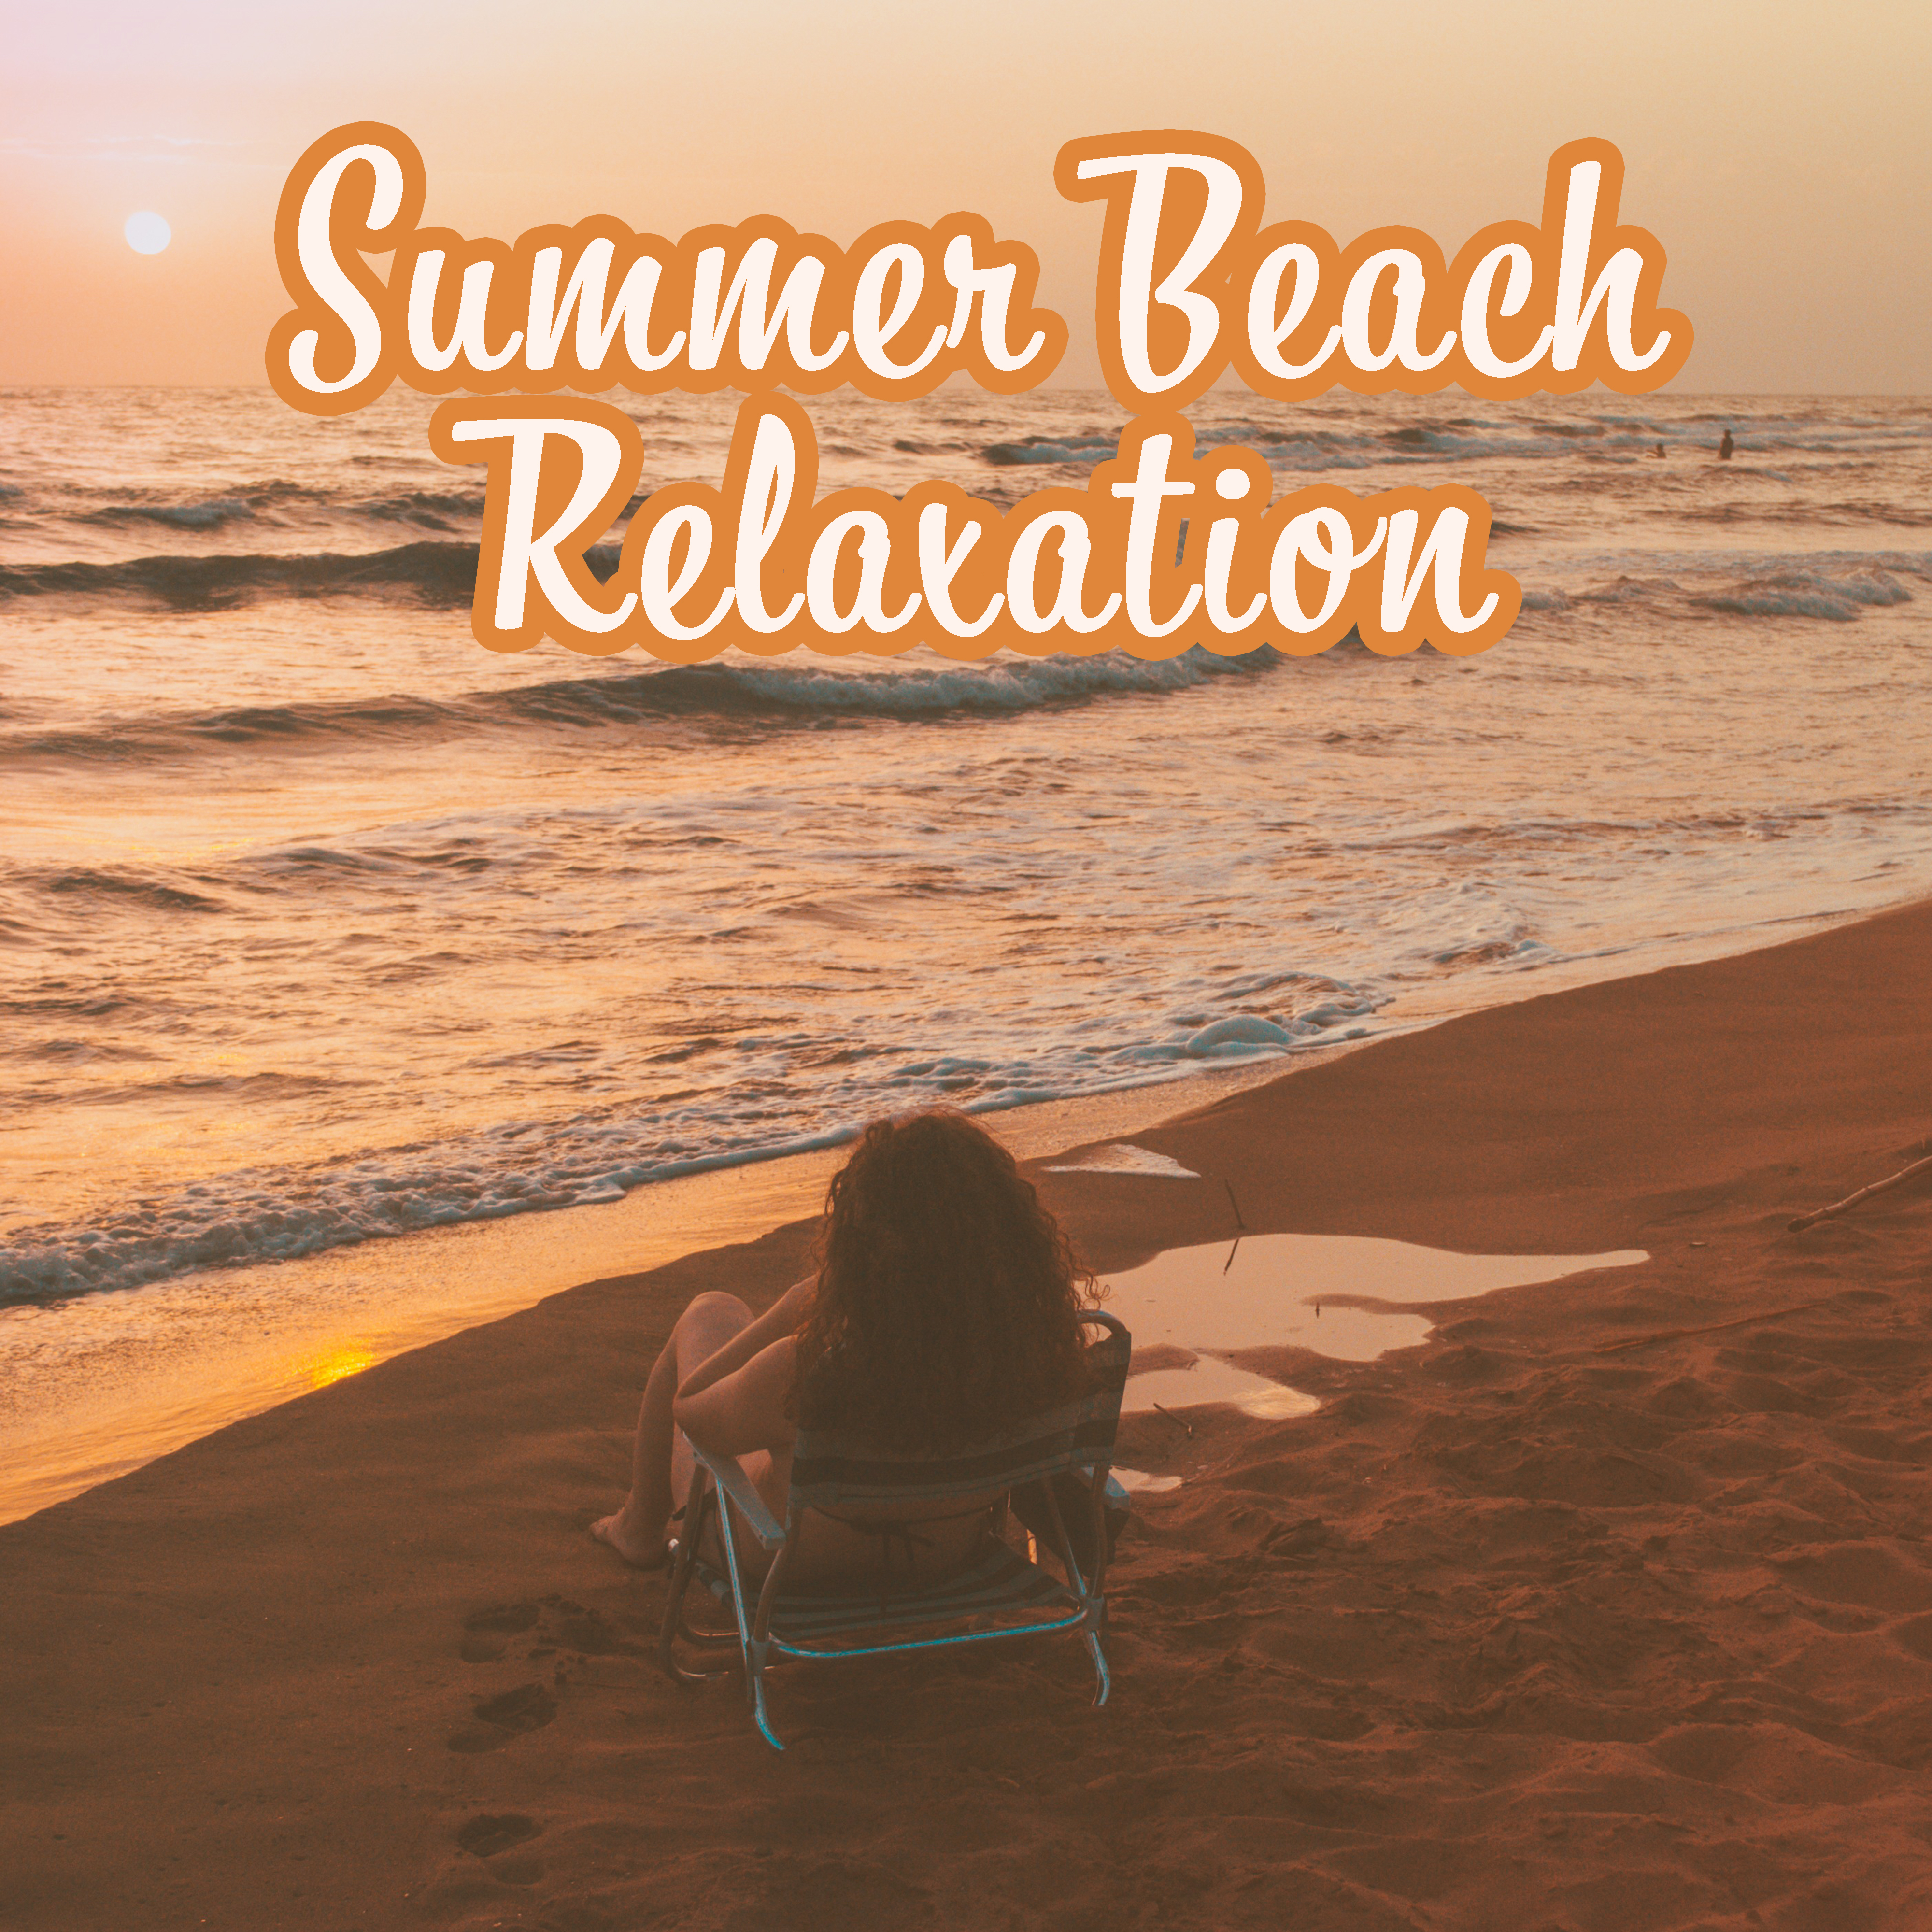 Summer Beach Relaxation – Easy Listening, Chill Out Beats, Ibiza Rest, Tropical Beach Lounge